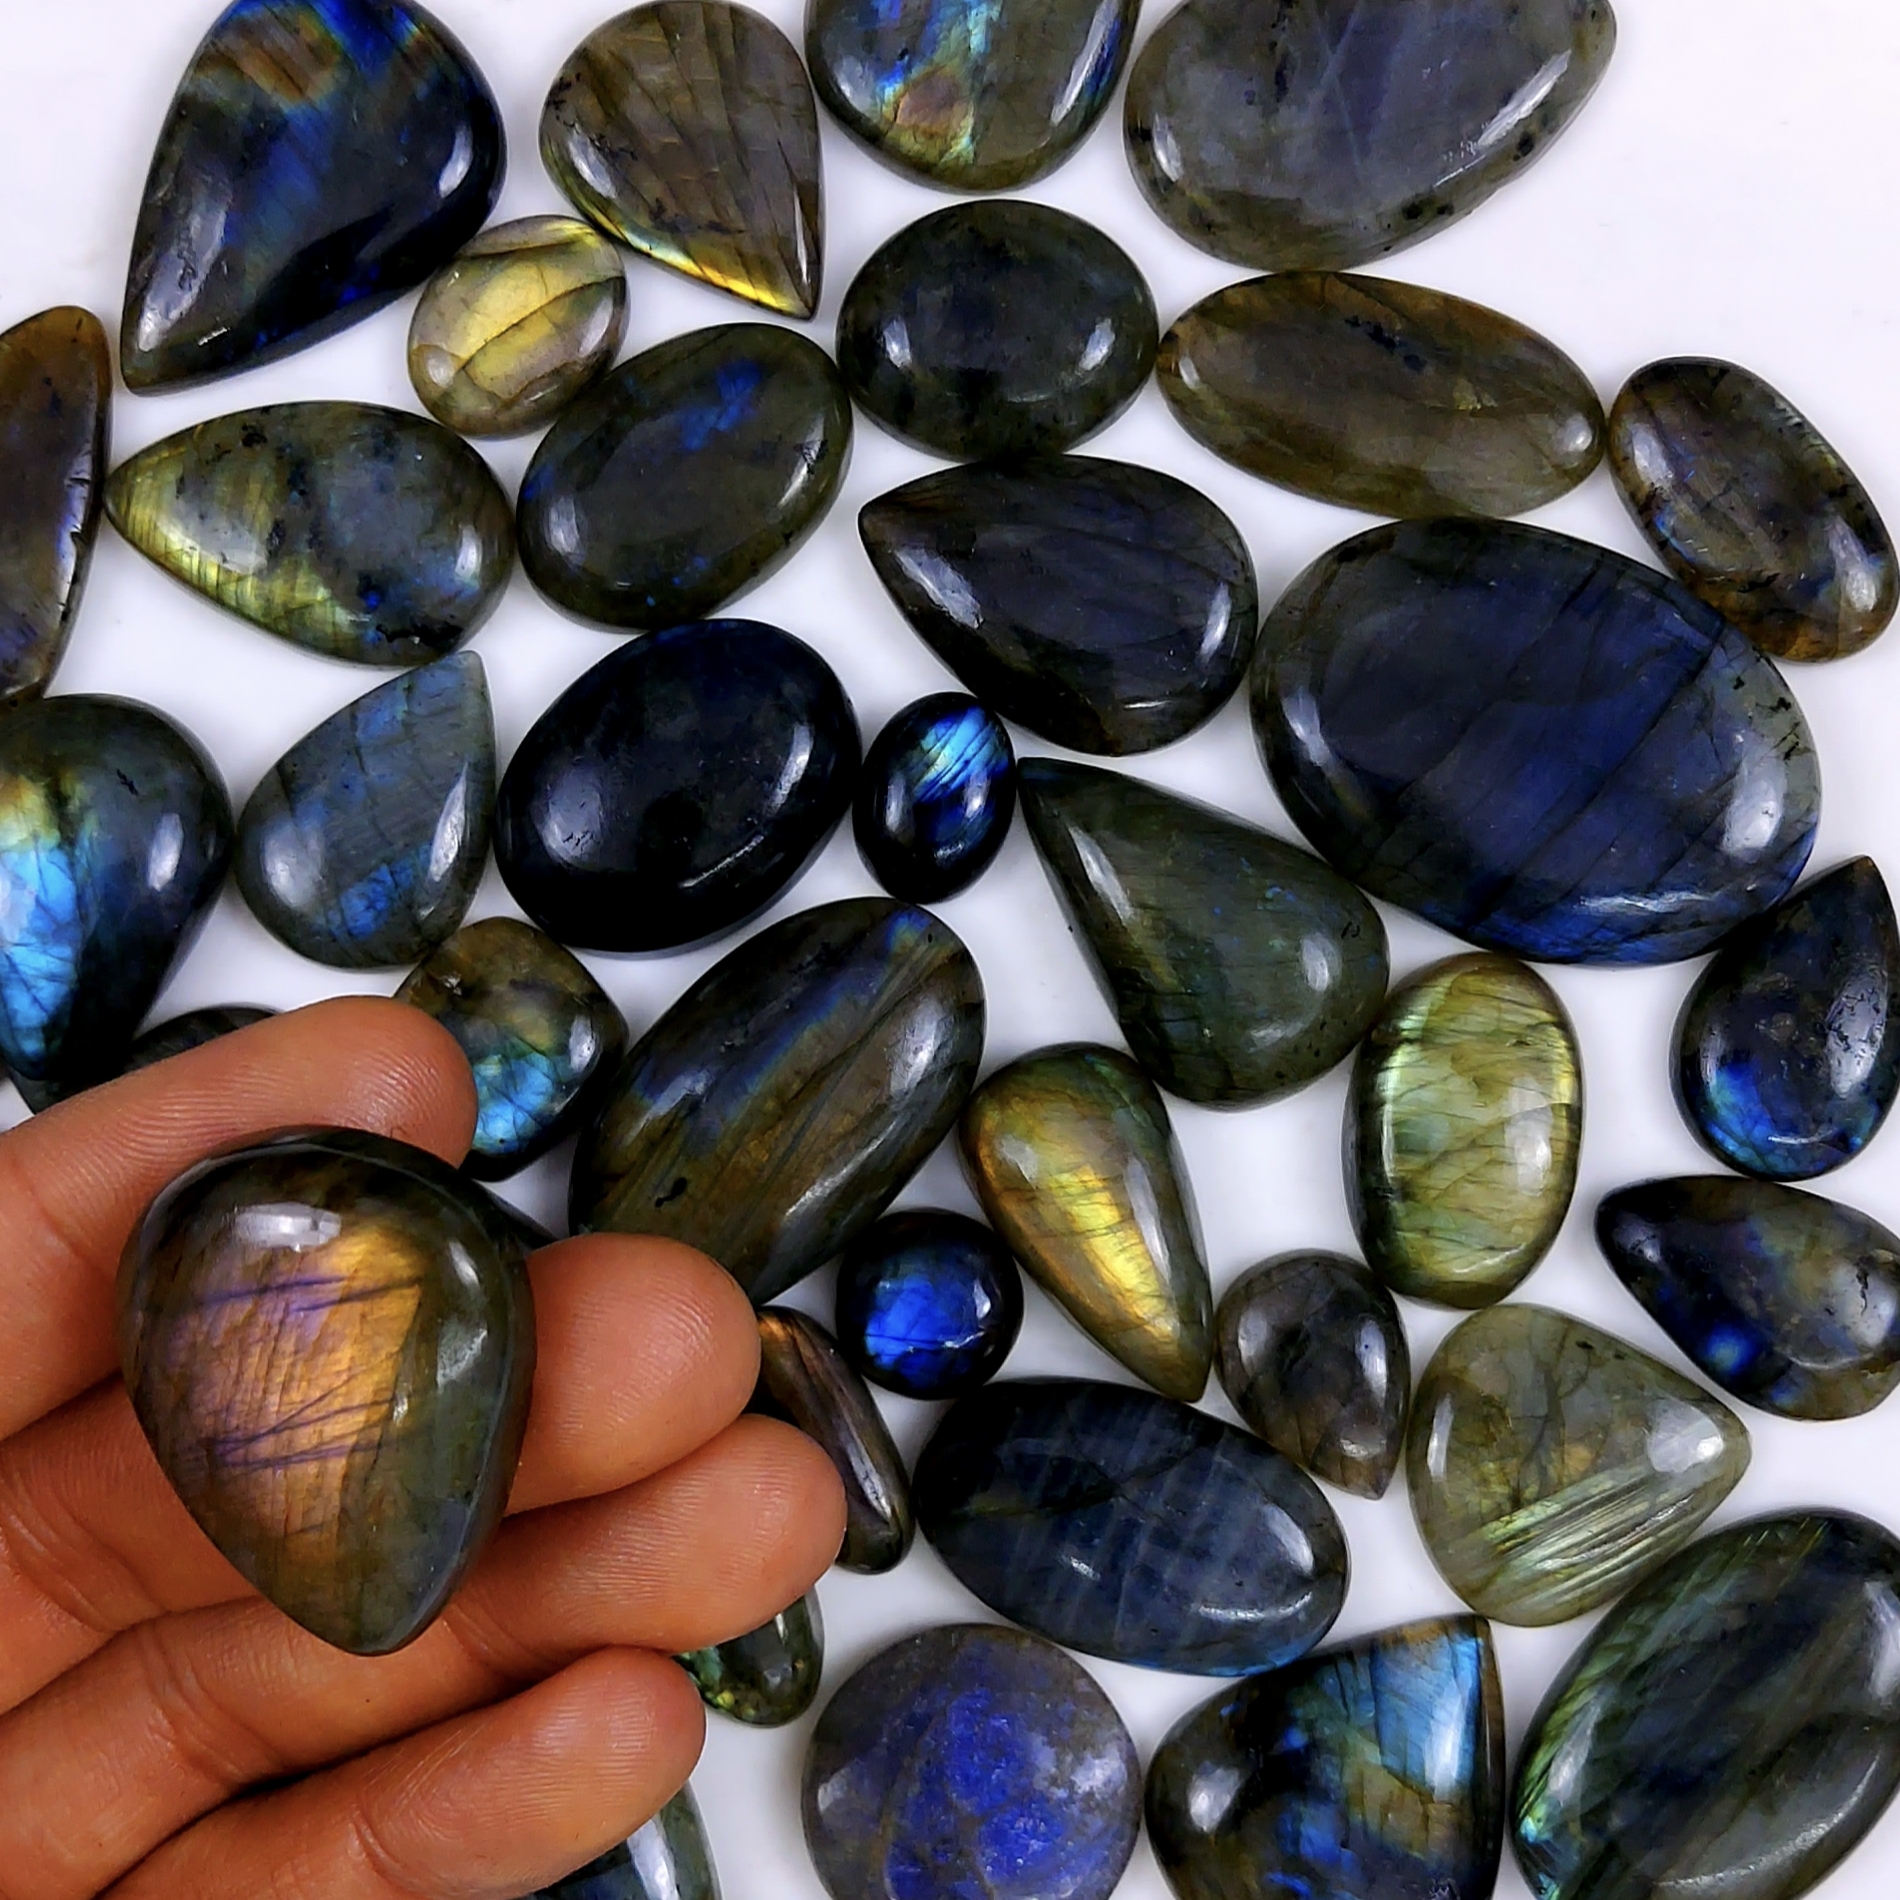 44pc 1537Cts Labradorite Cabochon Multifire Healing Crystal For Jewelry Supplies, Labradorite Necklace Handmade Wire Wrapped Gemstone Pendant 55x38 18x16mm#6385